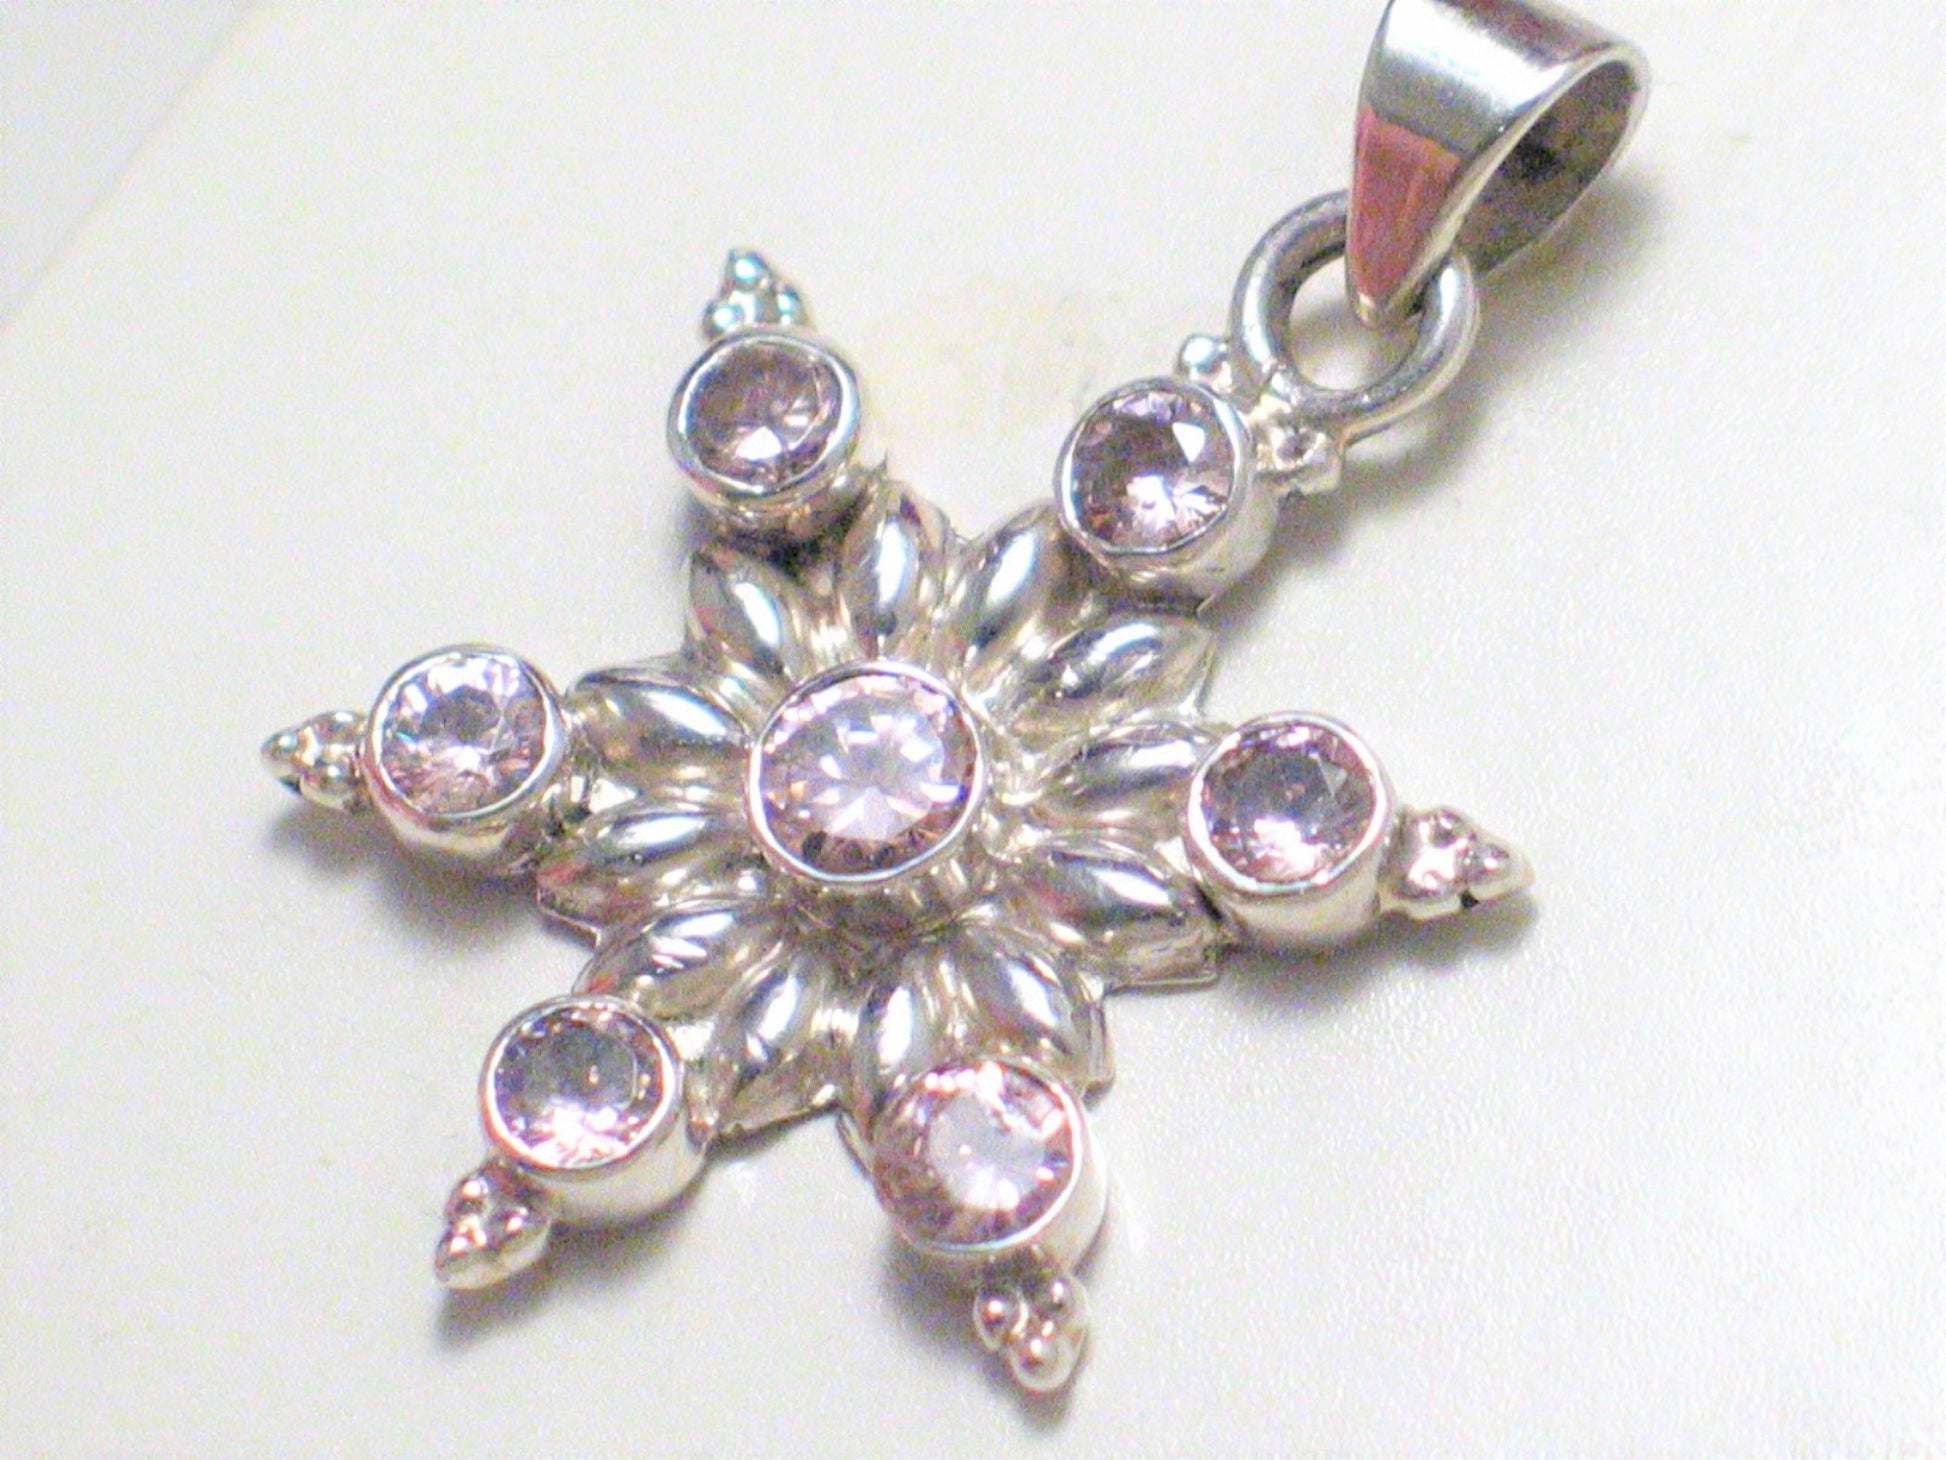 Pendant, Sterling Silver Star Design Sparkly Pink Stone Pendant - Blingschlingers Jewelry